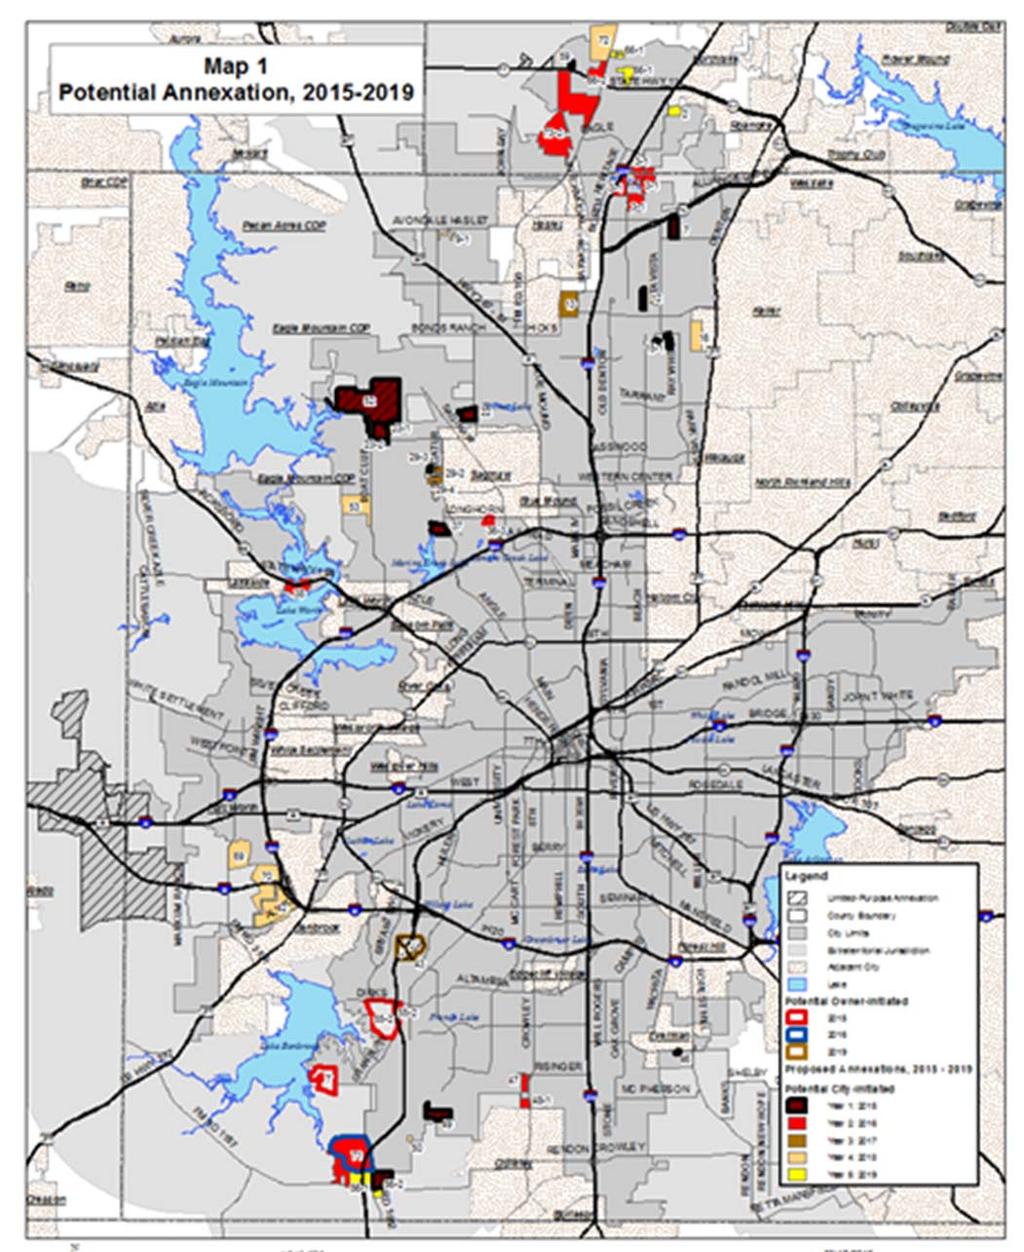 Potential Annexations: 2015-2019 A. Proposed full purpose annexation (15 areas) - totaling 3.